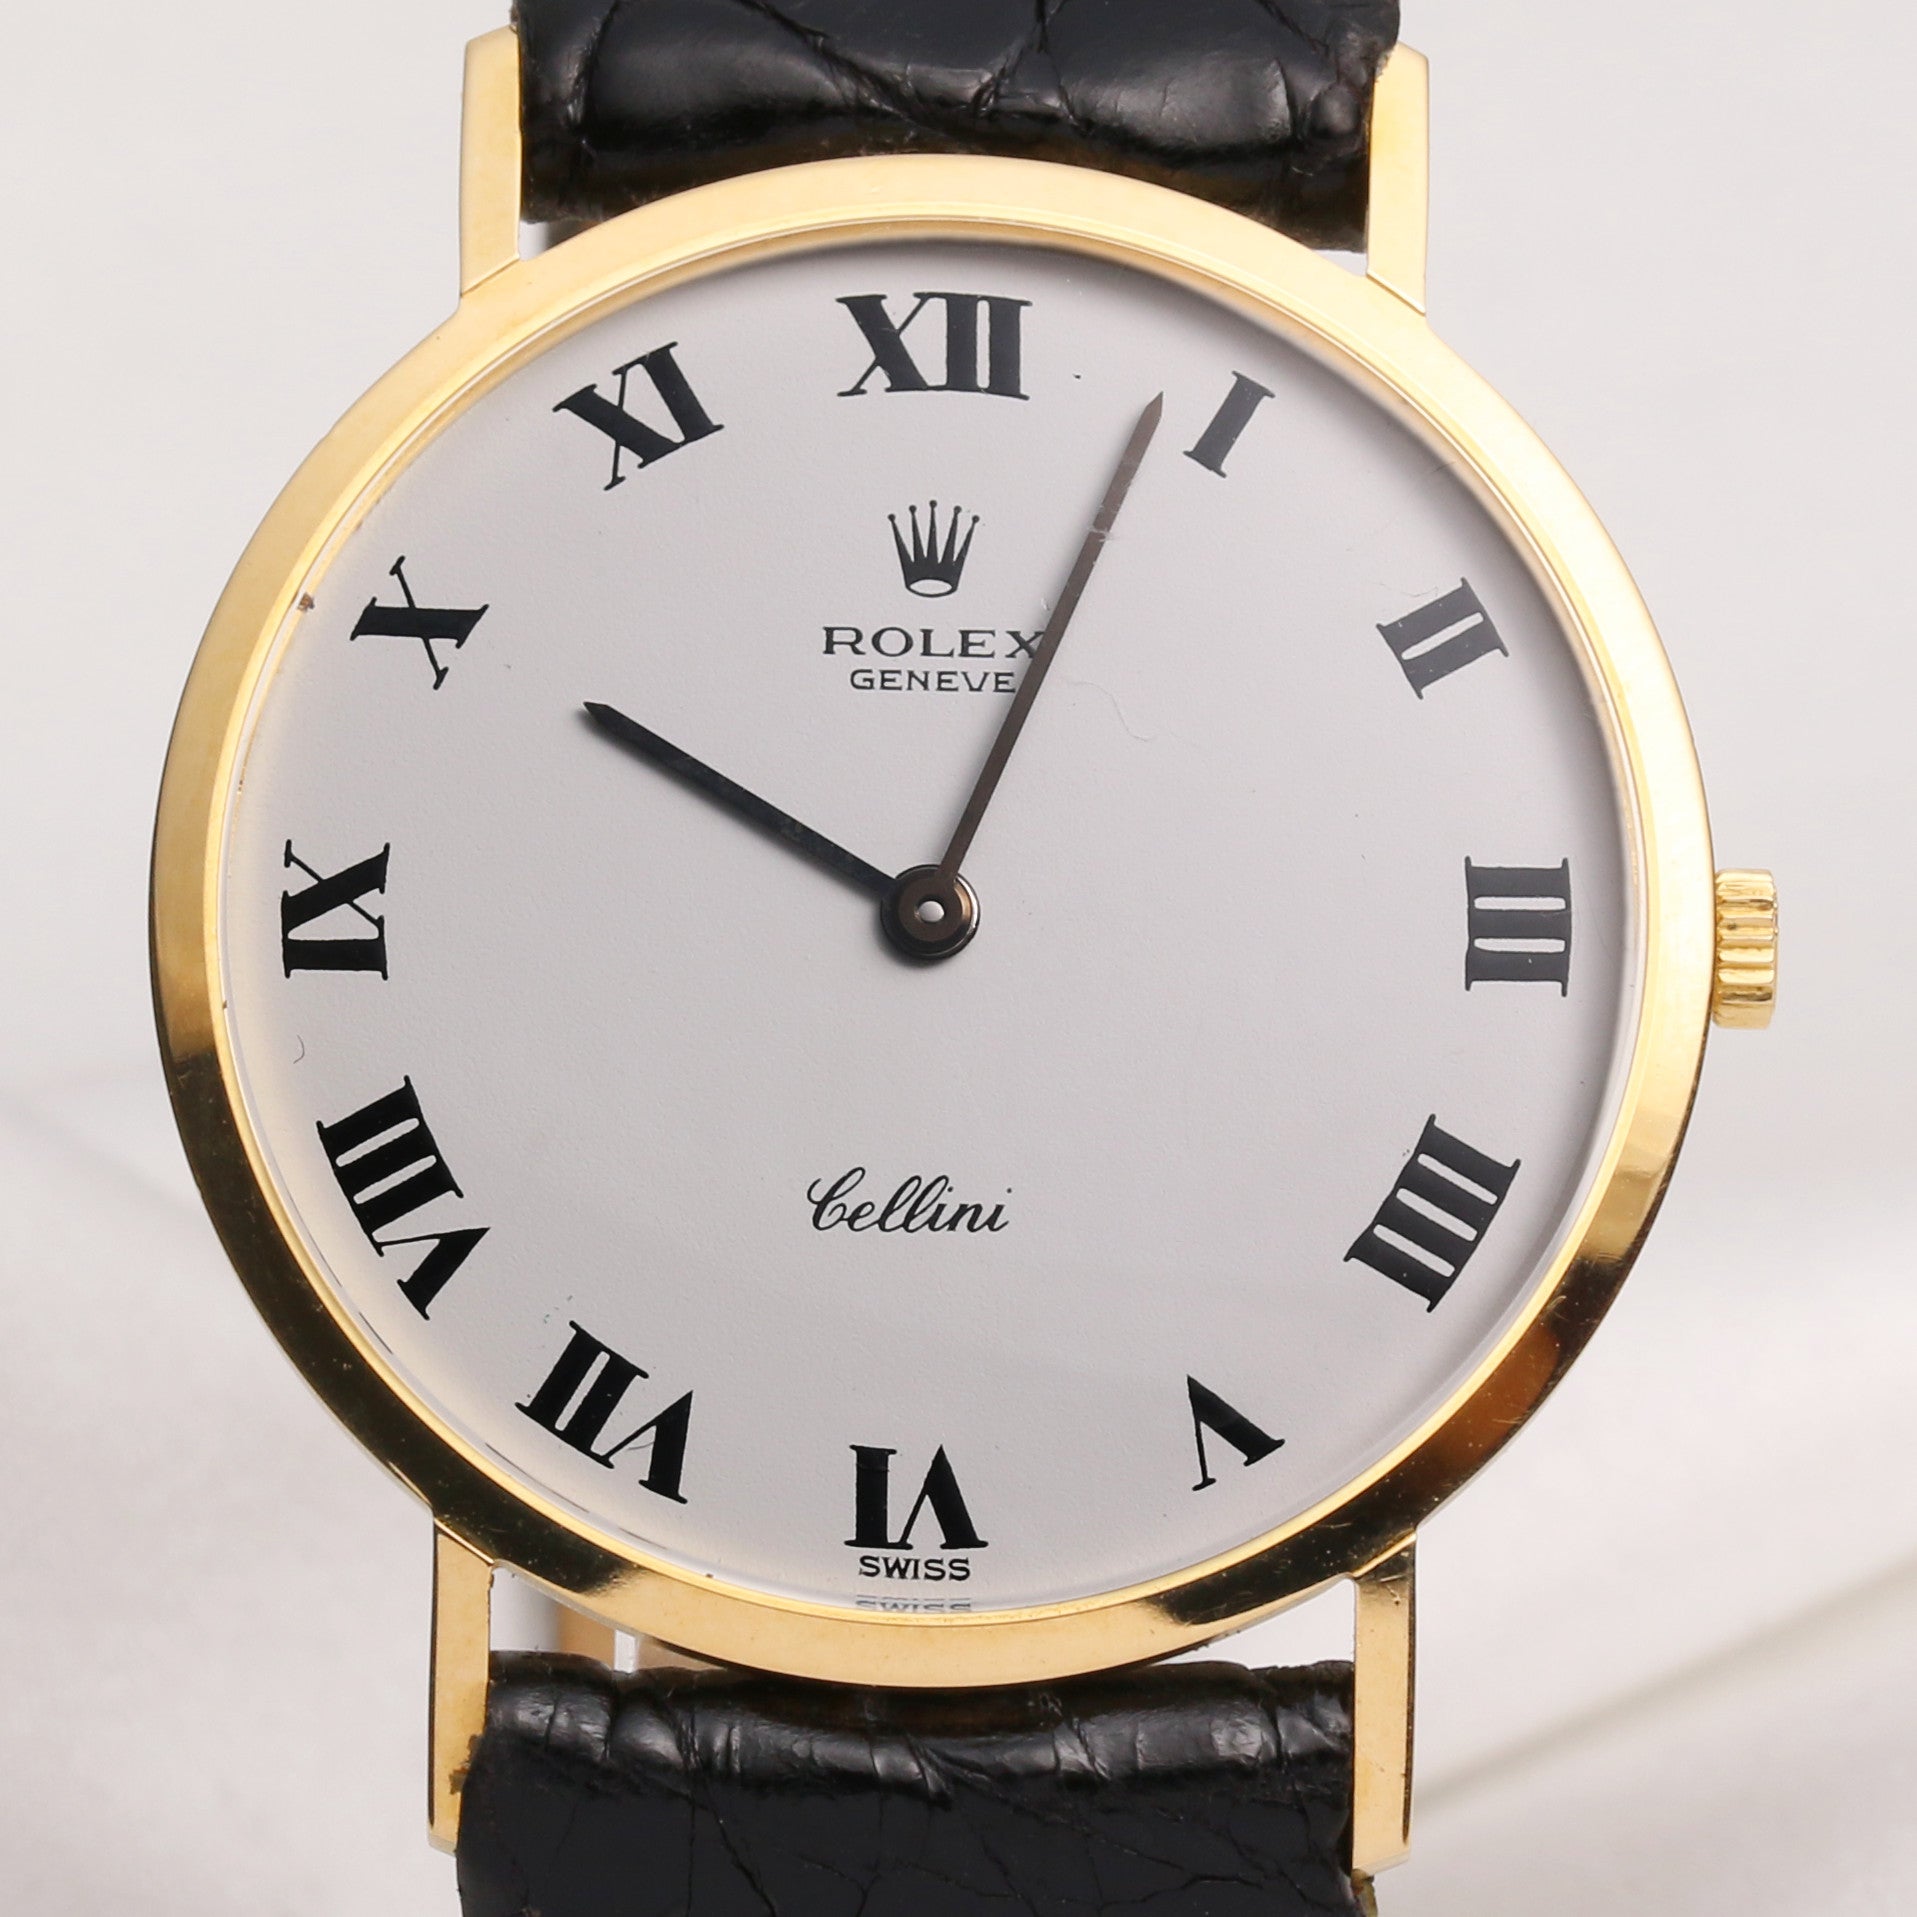 Sell Rolex Cellini Watches For The Best Prices | myGemma